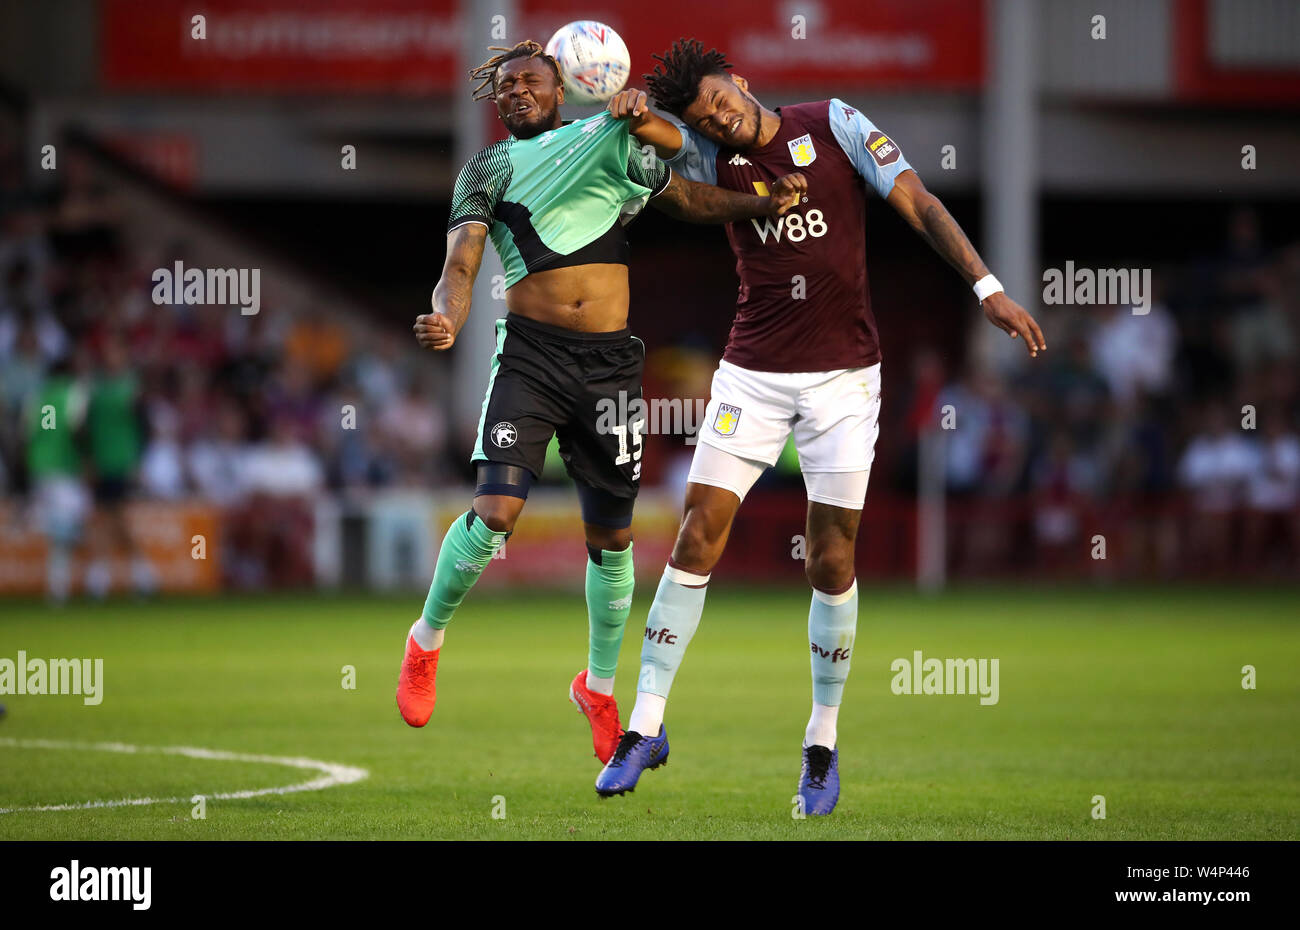 Walsall's Morgan Ferrier (left) and Aston Villa's Tyrone Mings battle for the ball during the pre-season friendly match at the Banks's Stadium, Walsall. Stock Photo